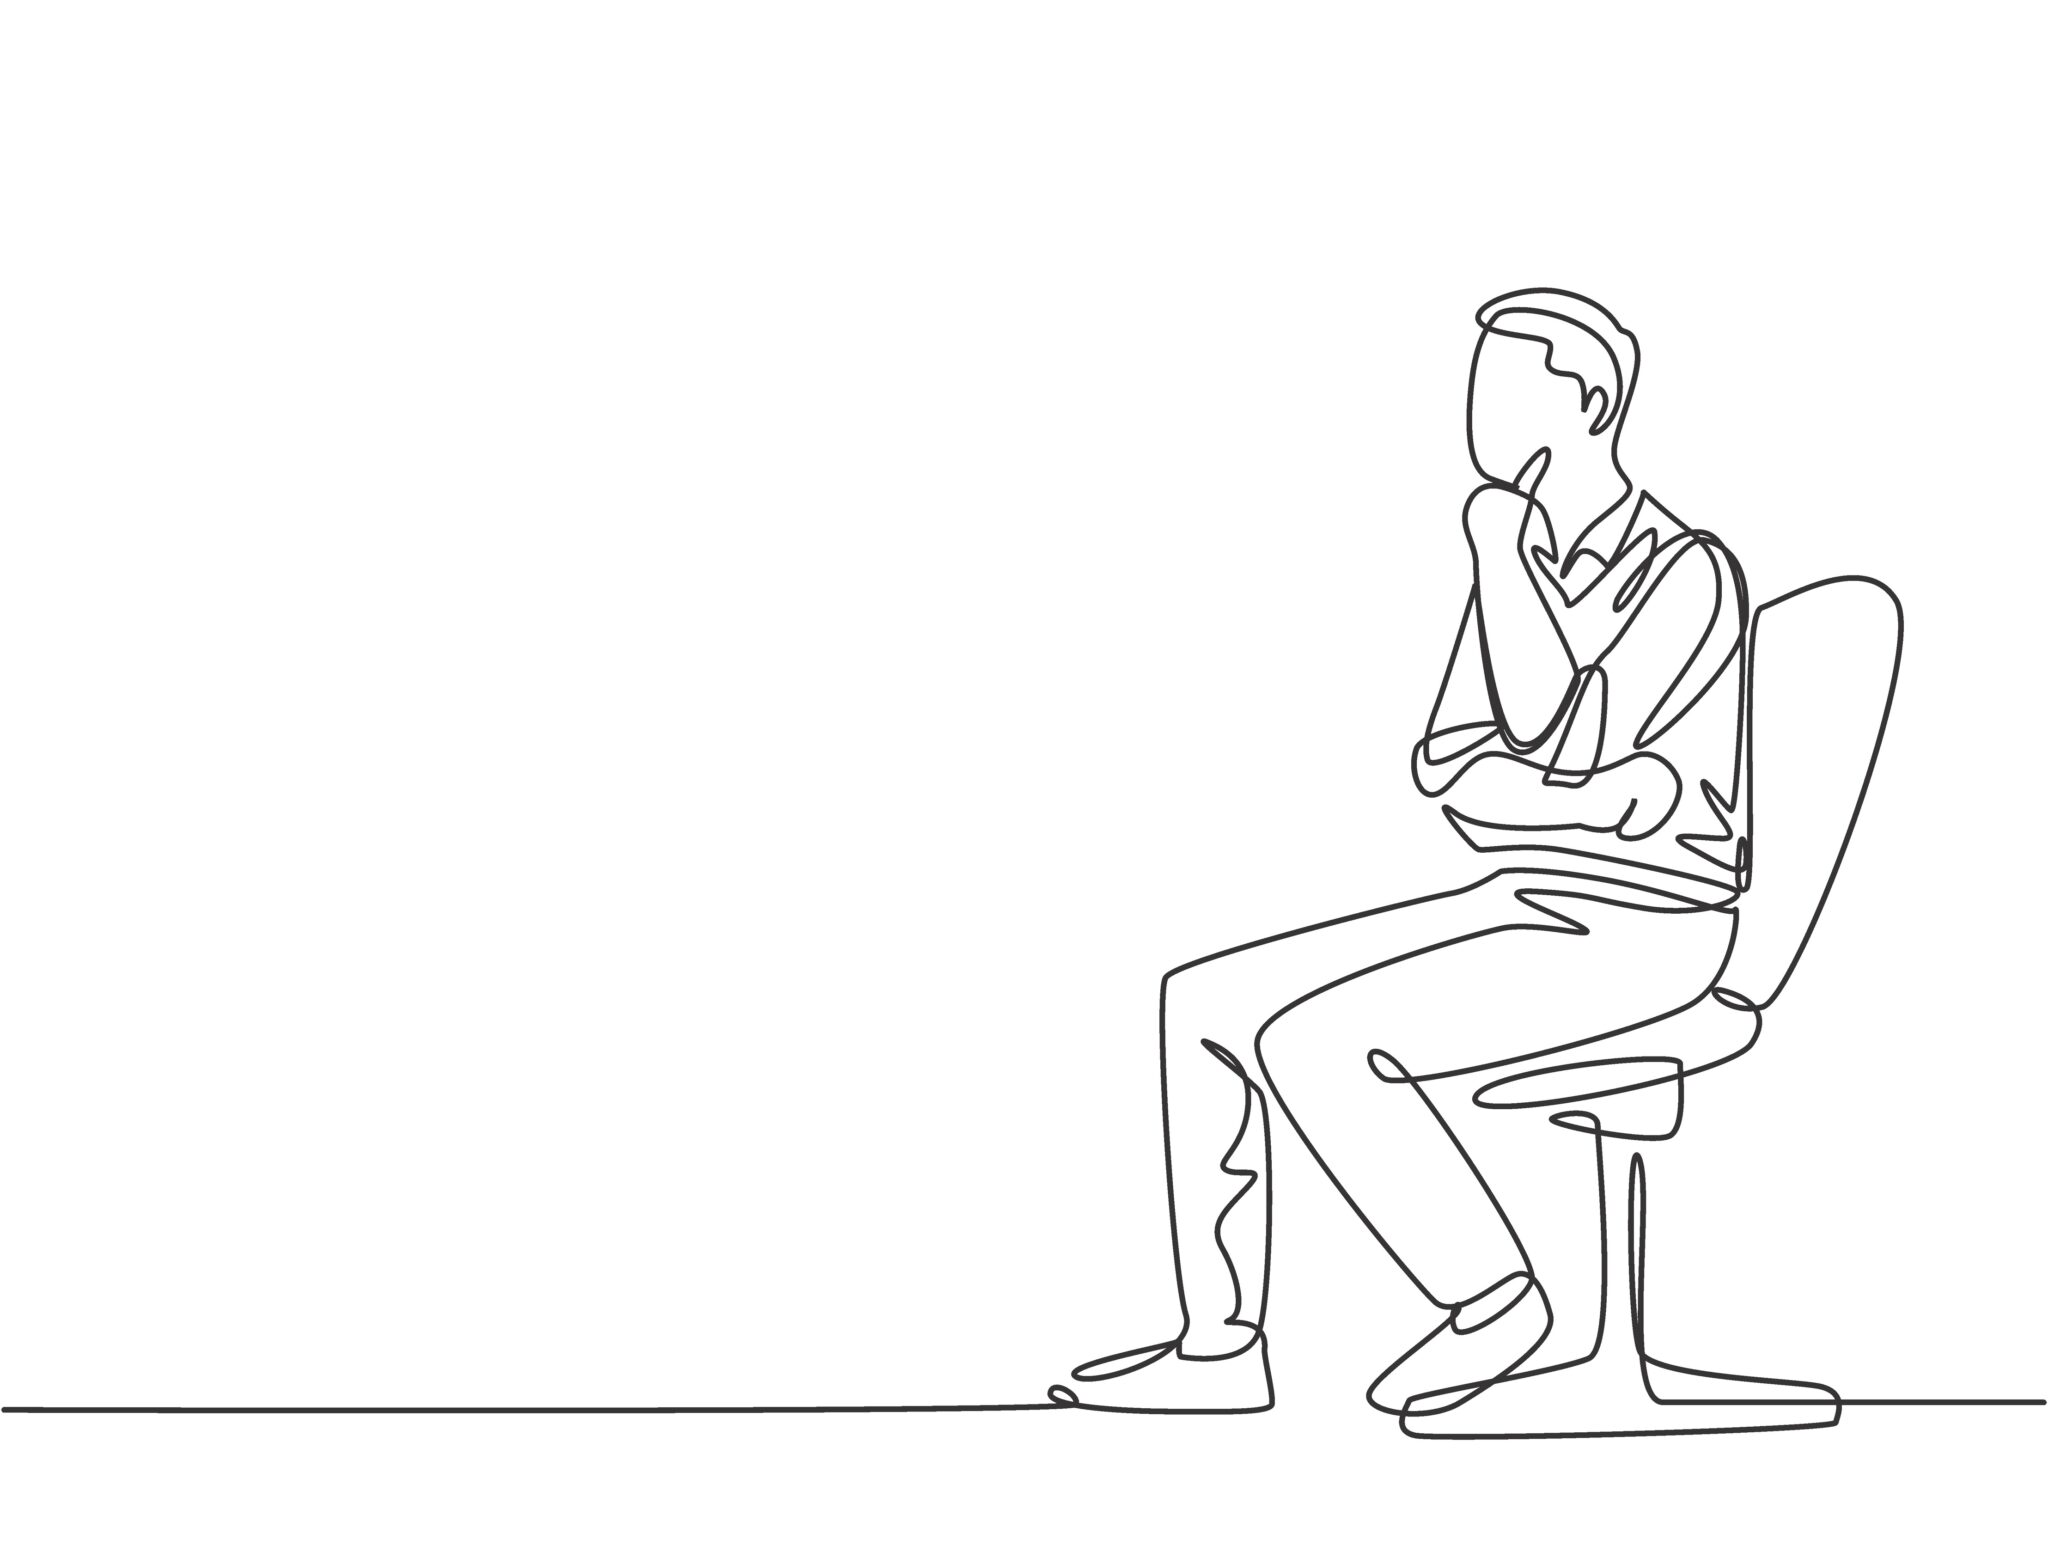 drawing of person thinking in one continuous line